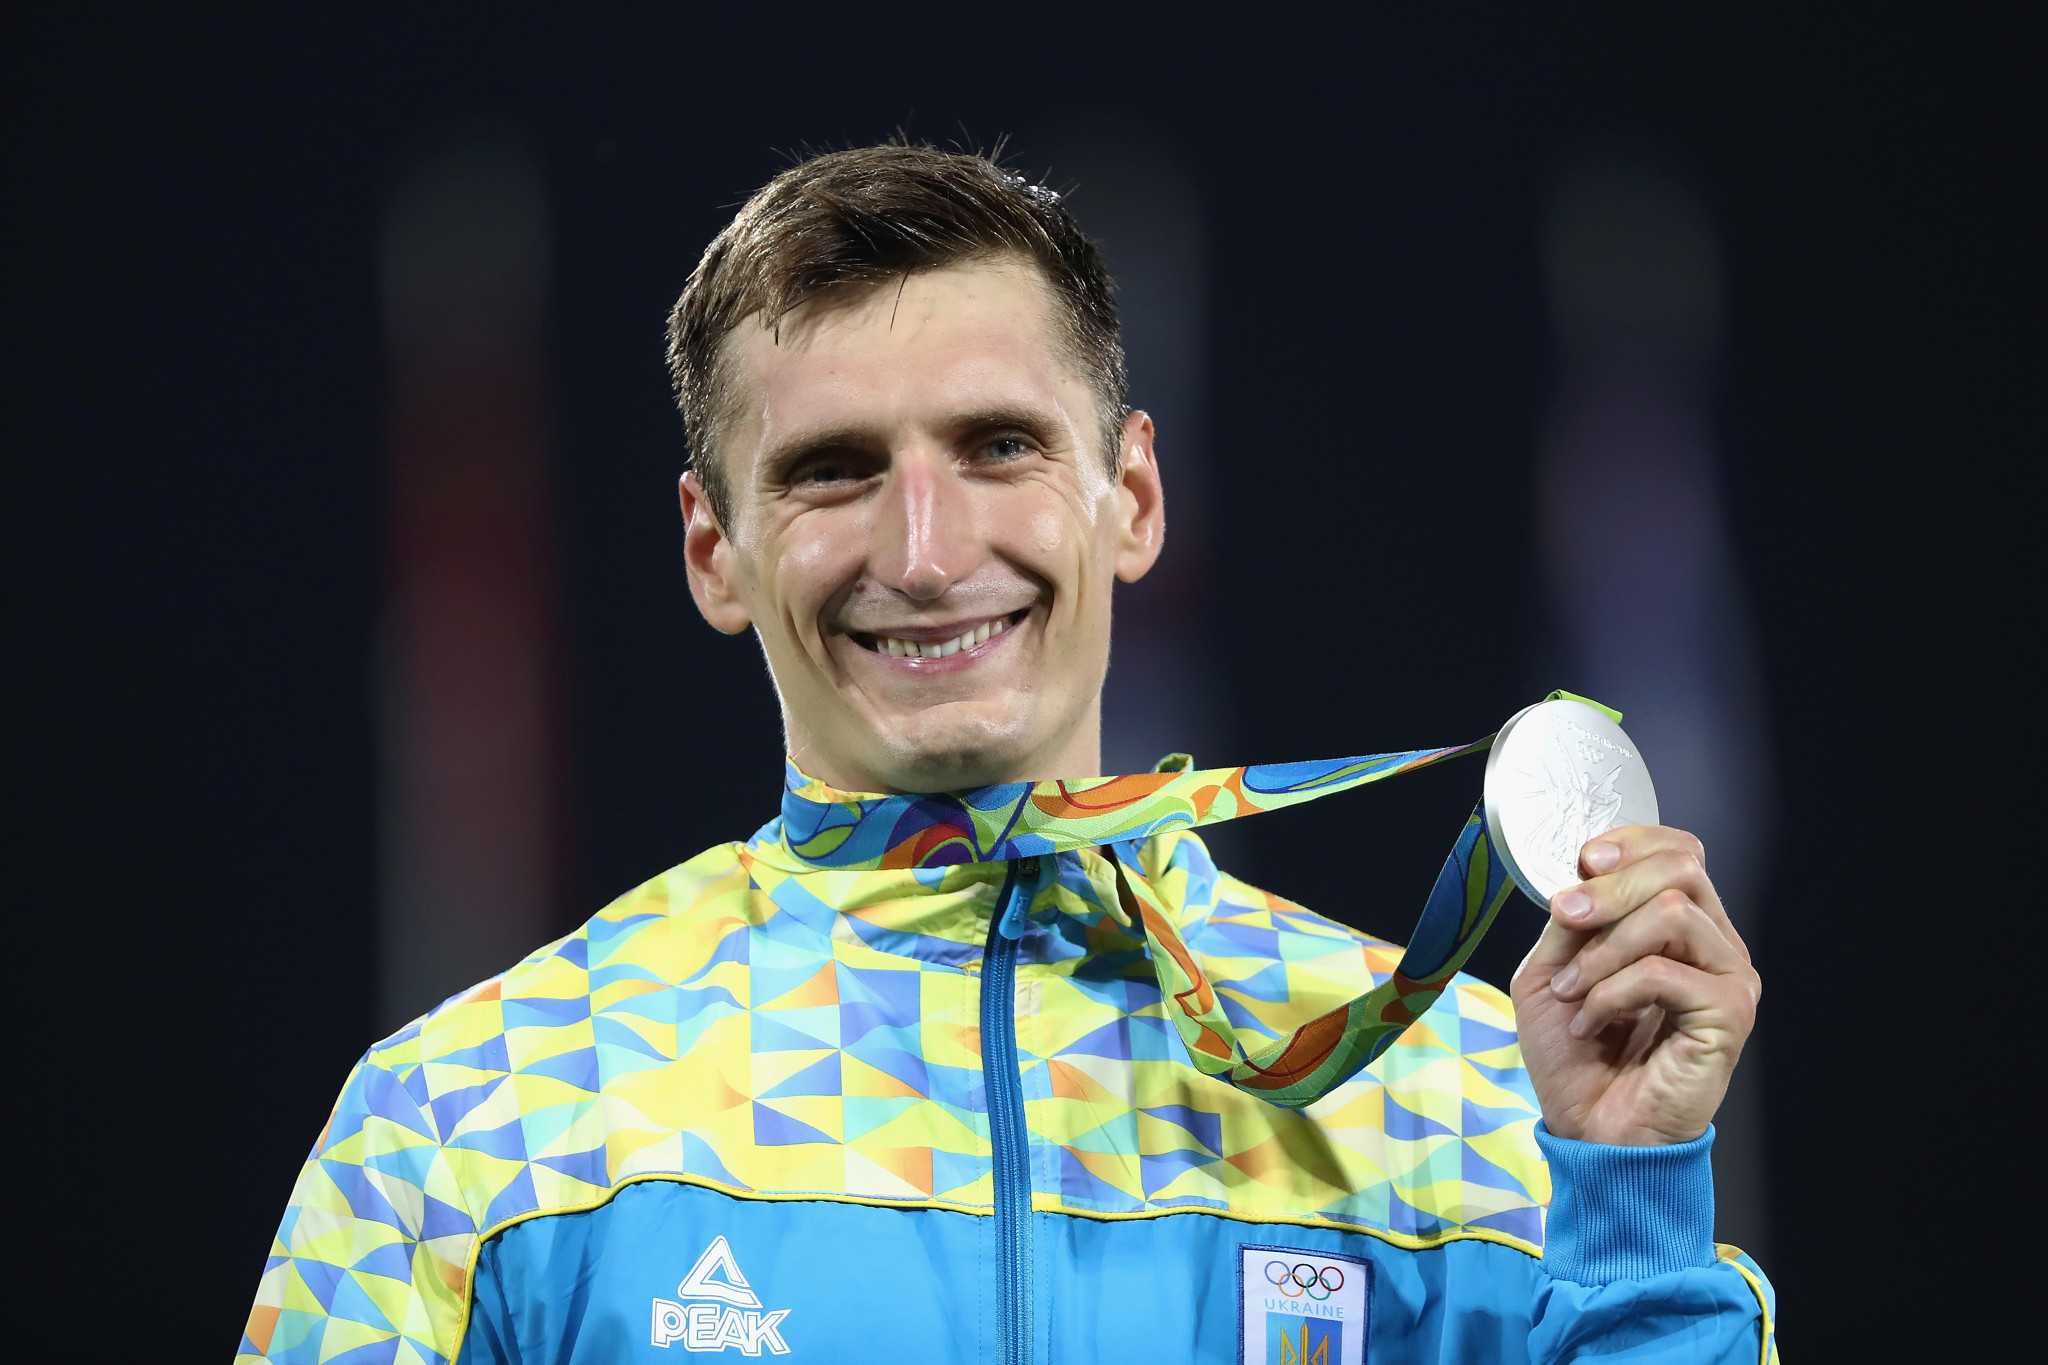 Pavlo Tymoshchenko who won silver at Rio 2016 has spoken out against UIPM's new format for Paris 2024 ©Getty Images